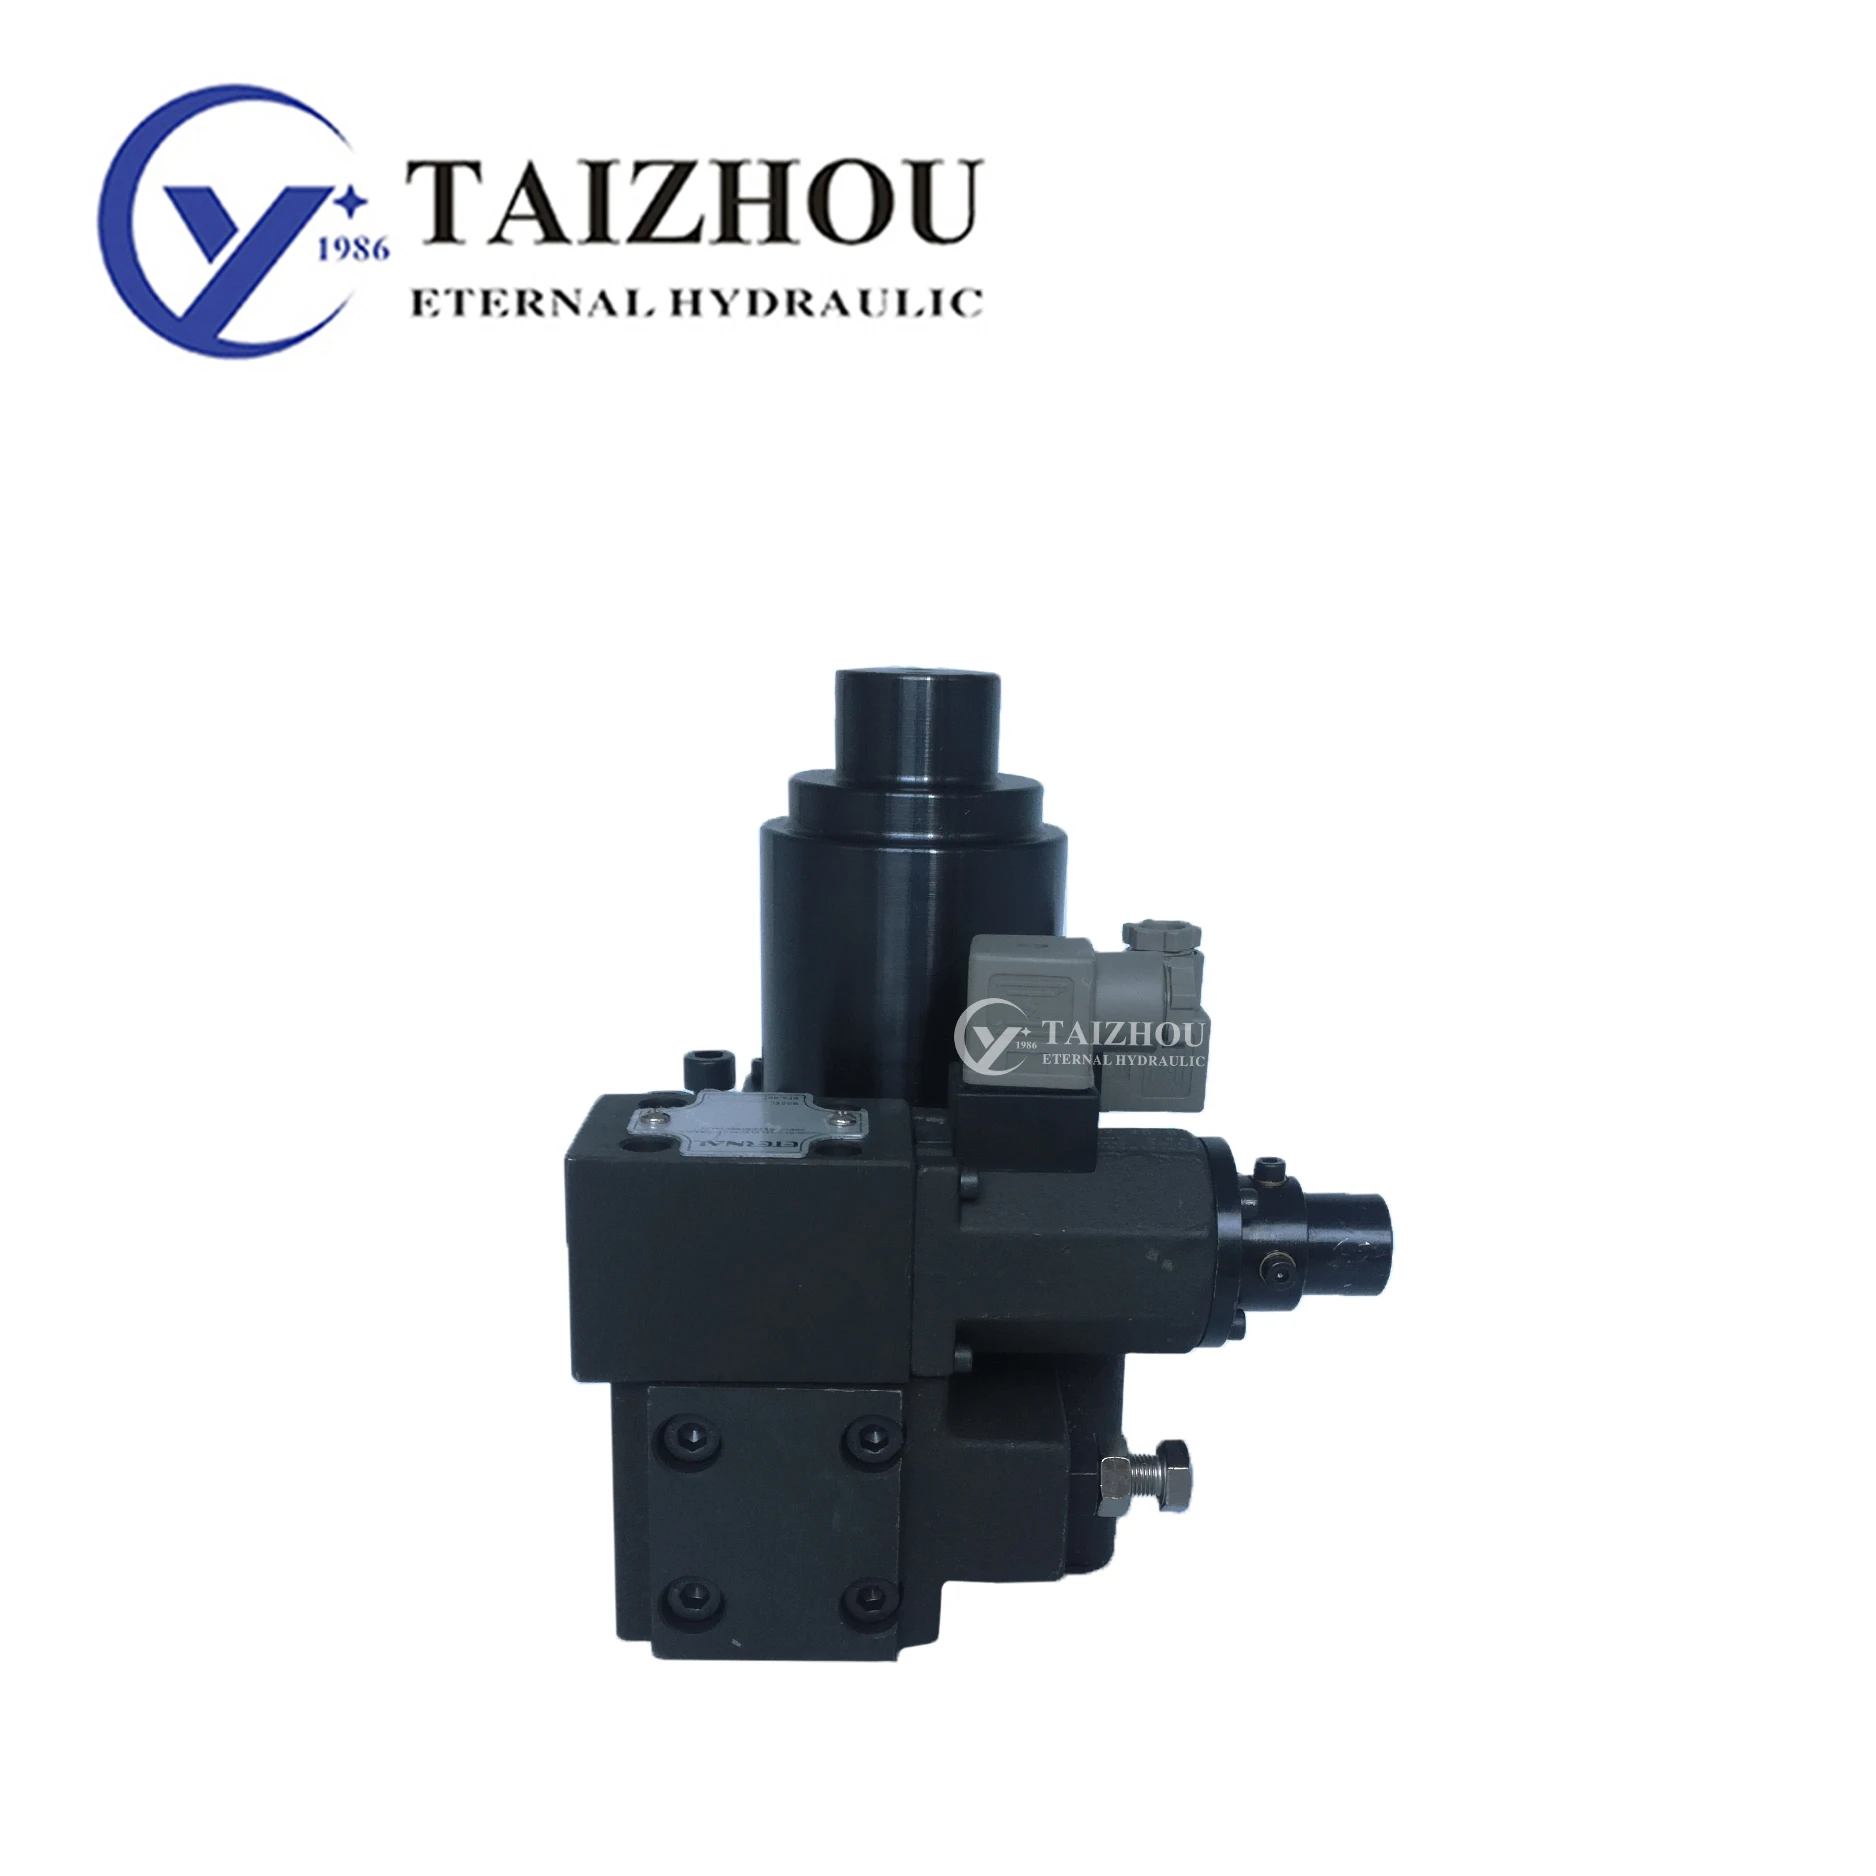 EFBG 03-125  Proportional Electric Hydraulic Pressure and Flow Control Valve